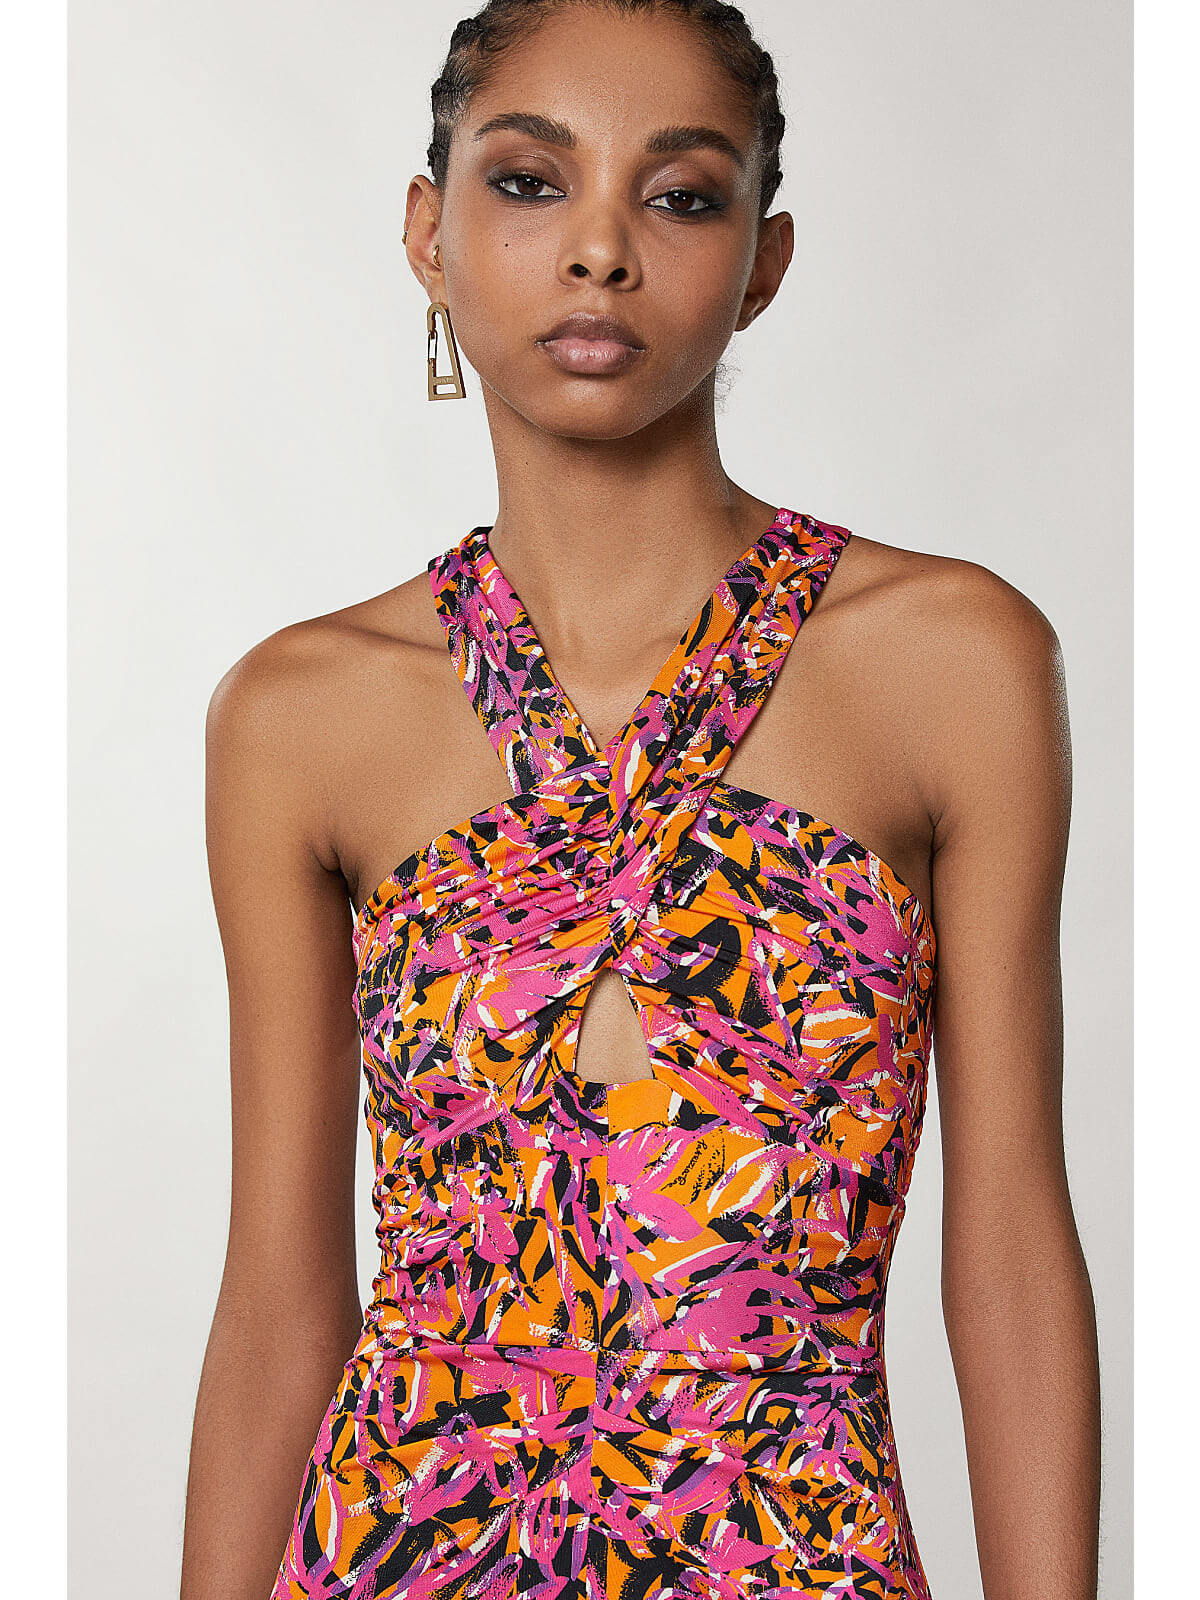 This crossover-neck dress in technical jersey fabric boasts cut-out details and a vivid pattern: perfect for summer days. It showcases head-turning explosive colors. 2A2566 